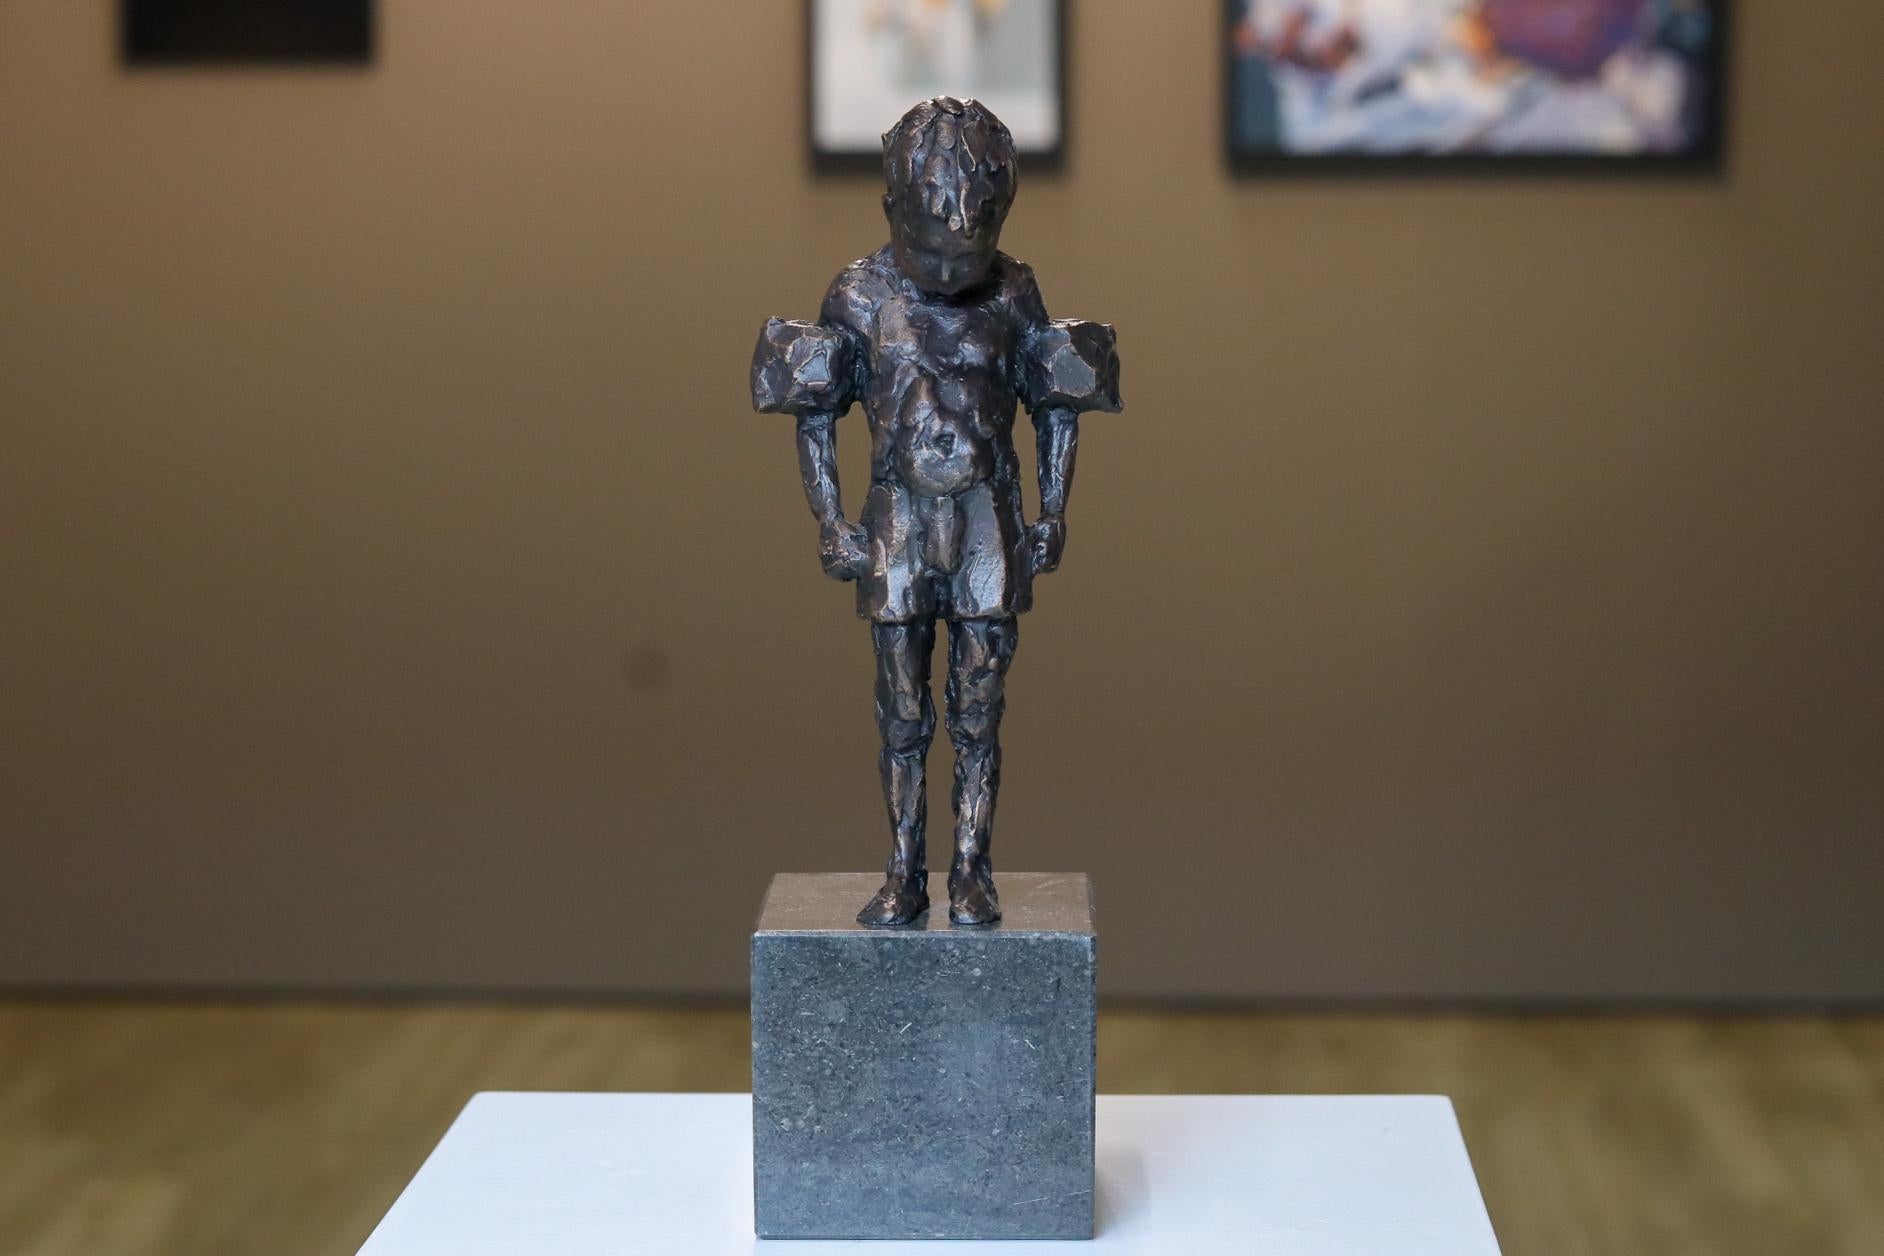 Swimming Lessons - 21st Century Contemporary Bronze Sculpture of a Little Boy - Gold Figurative Sculpture by Mieke Heitling